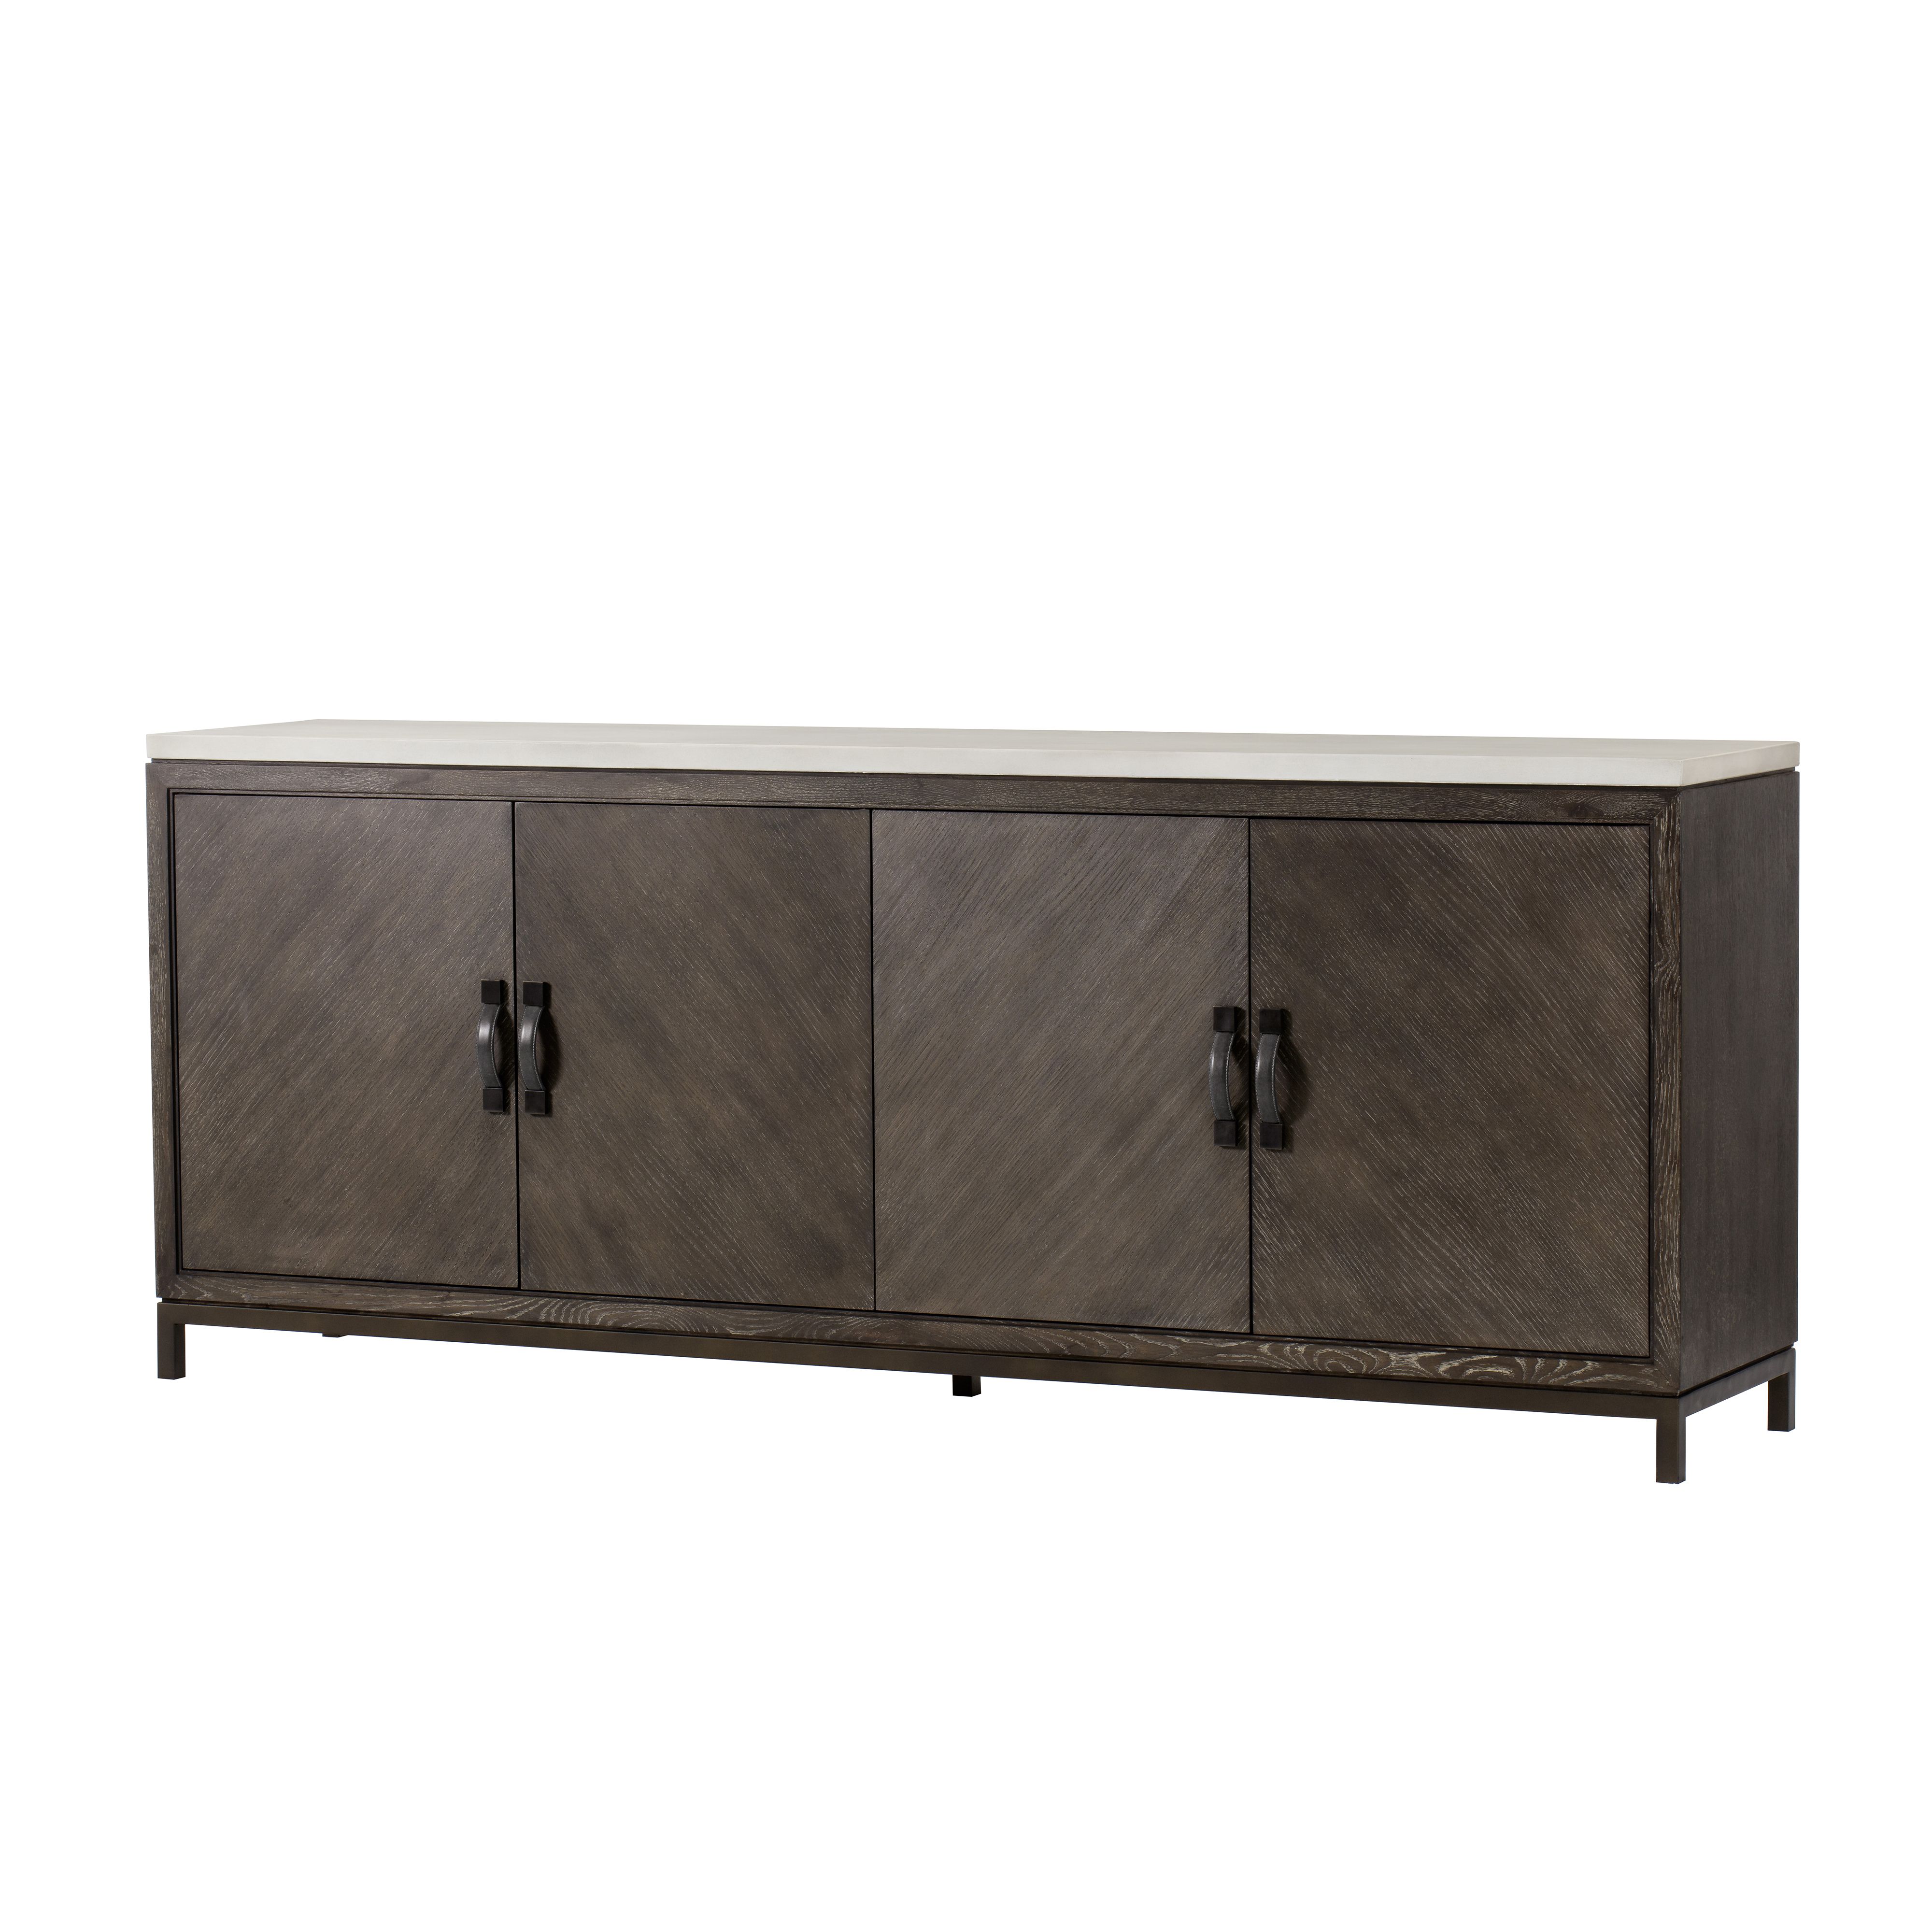 Monarch Kendall Sideboard In 2019 | Deborah's Theme Pertaining To Current Kendall Sideboards (Photo 12 of 20)